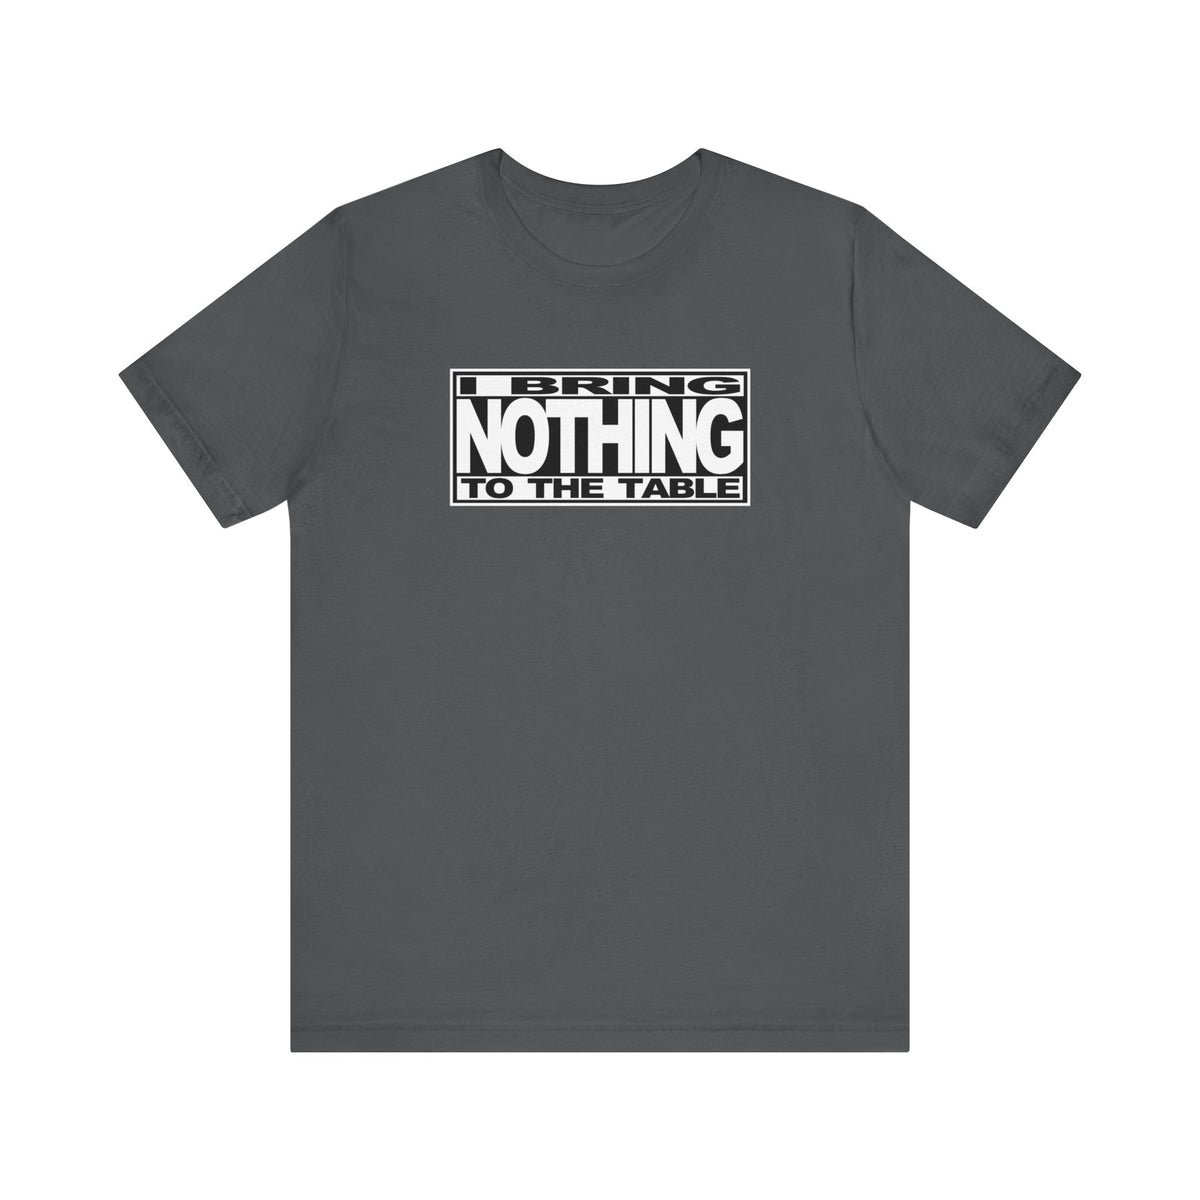 I Bring Nothing To The Table - Men's T-Shirt